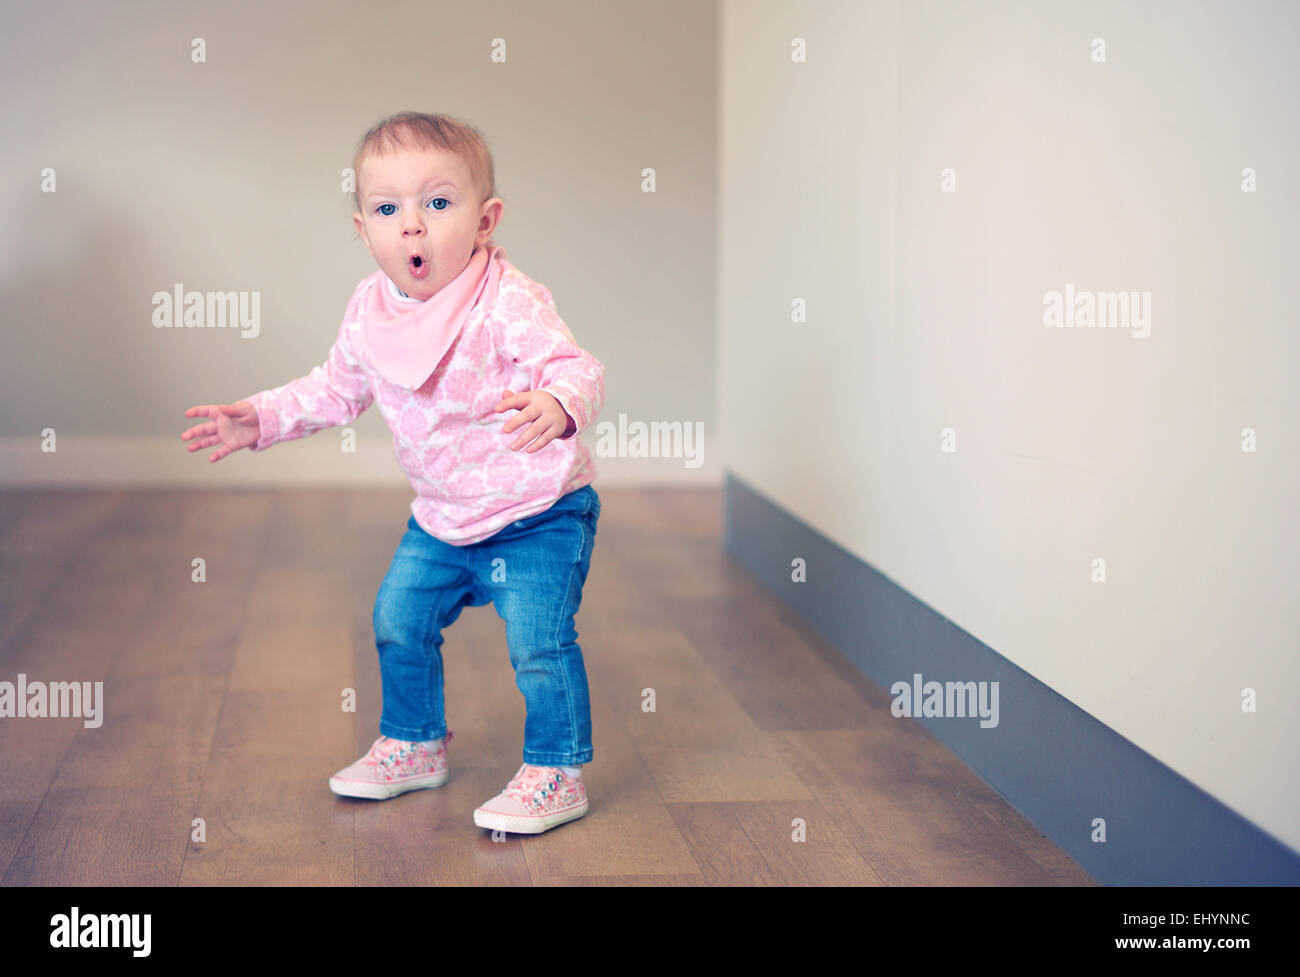 Baby girl learning to walk Stock Photo